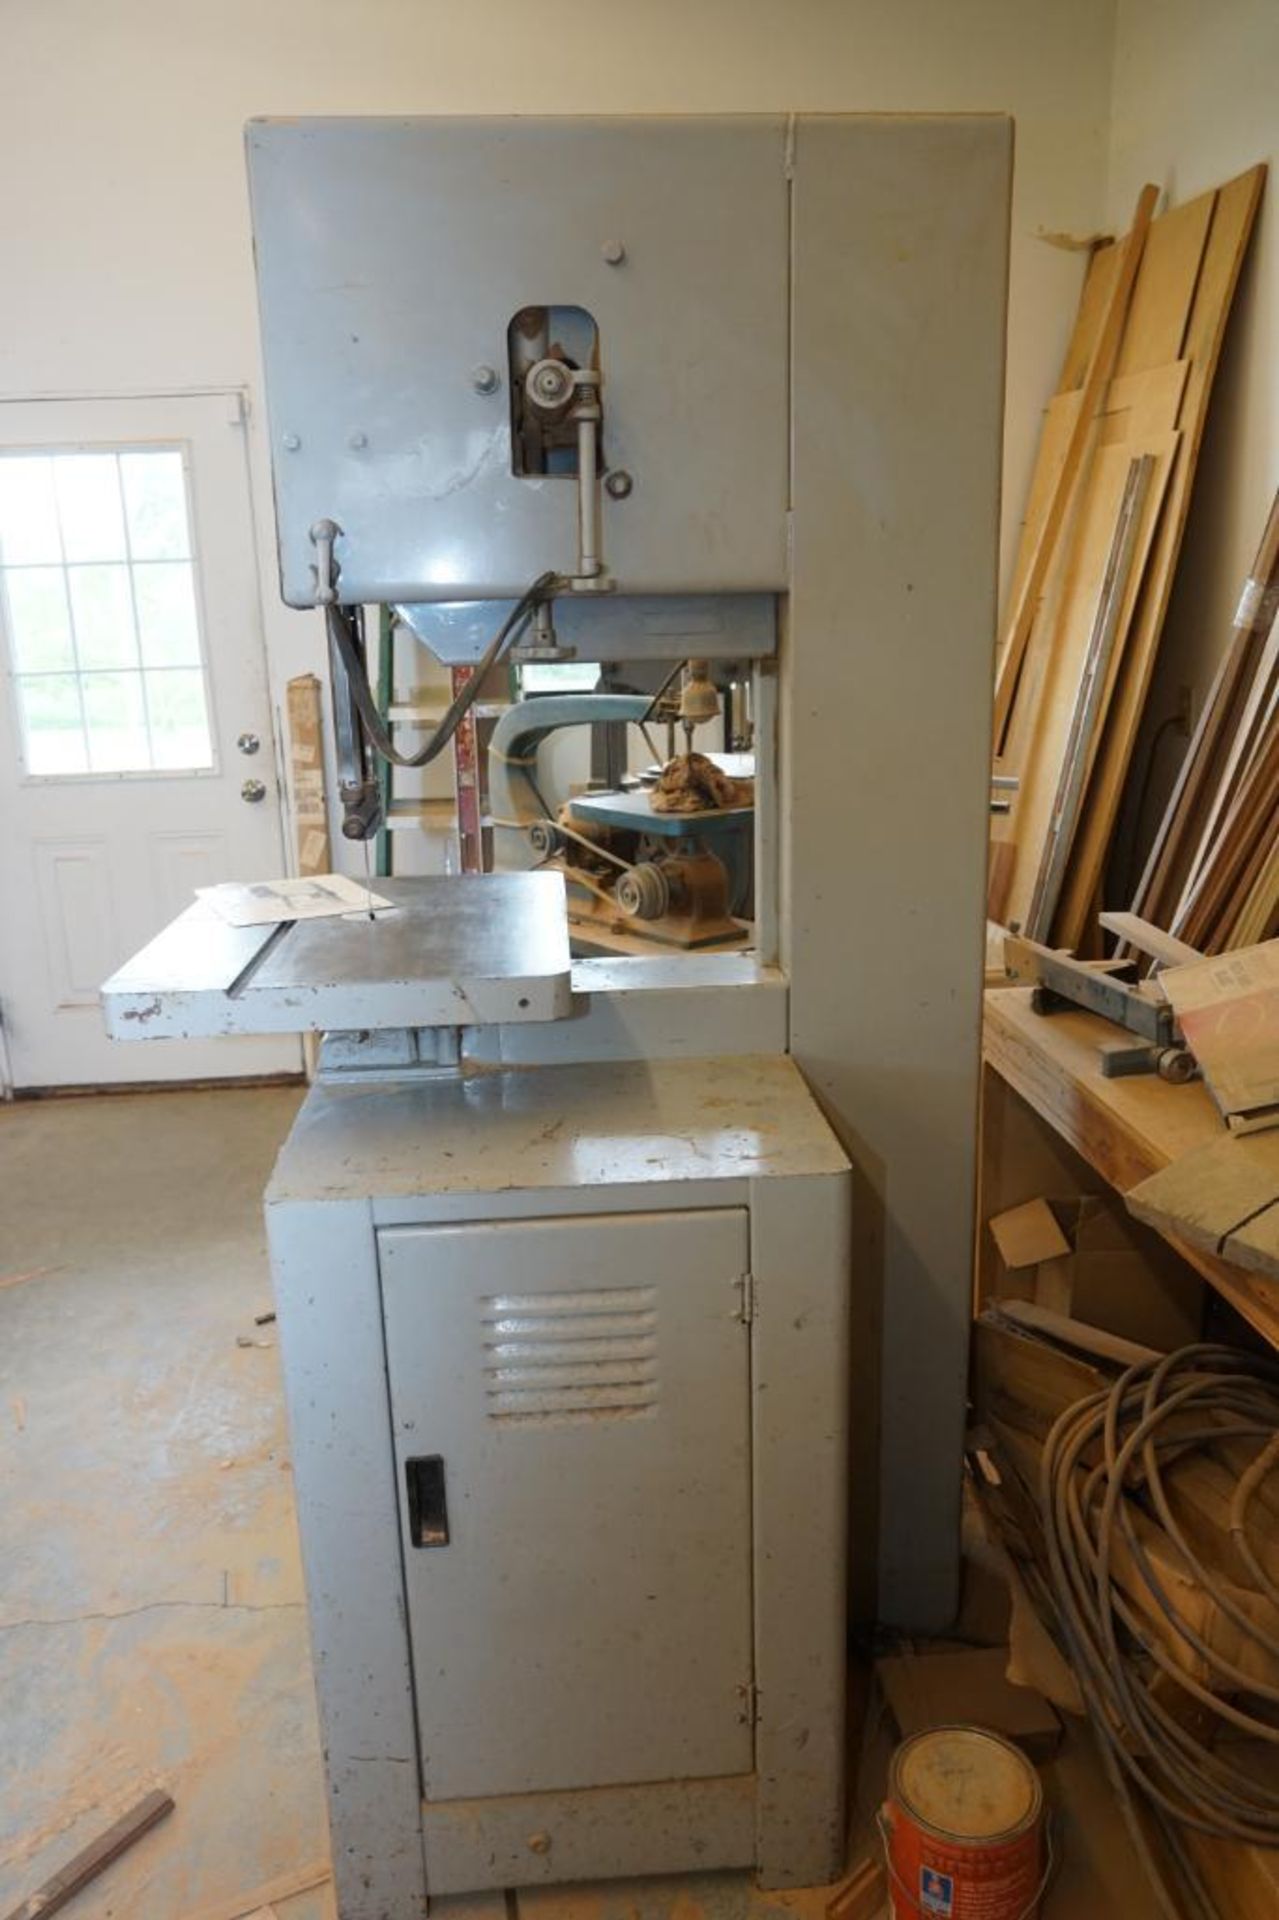 Rockwell 20 in. Vertical Bandsaw - Image 3 of 10